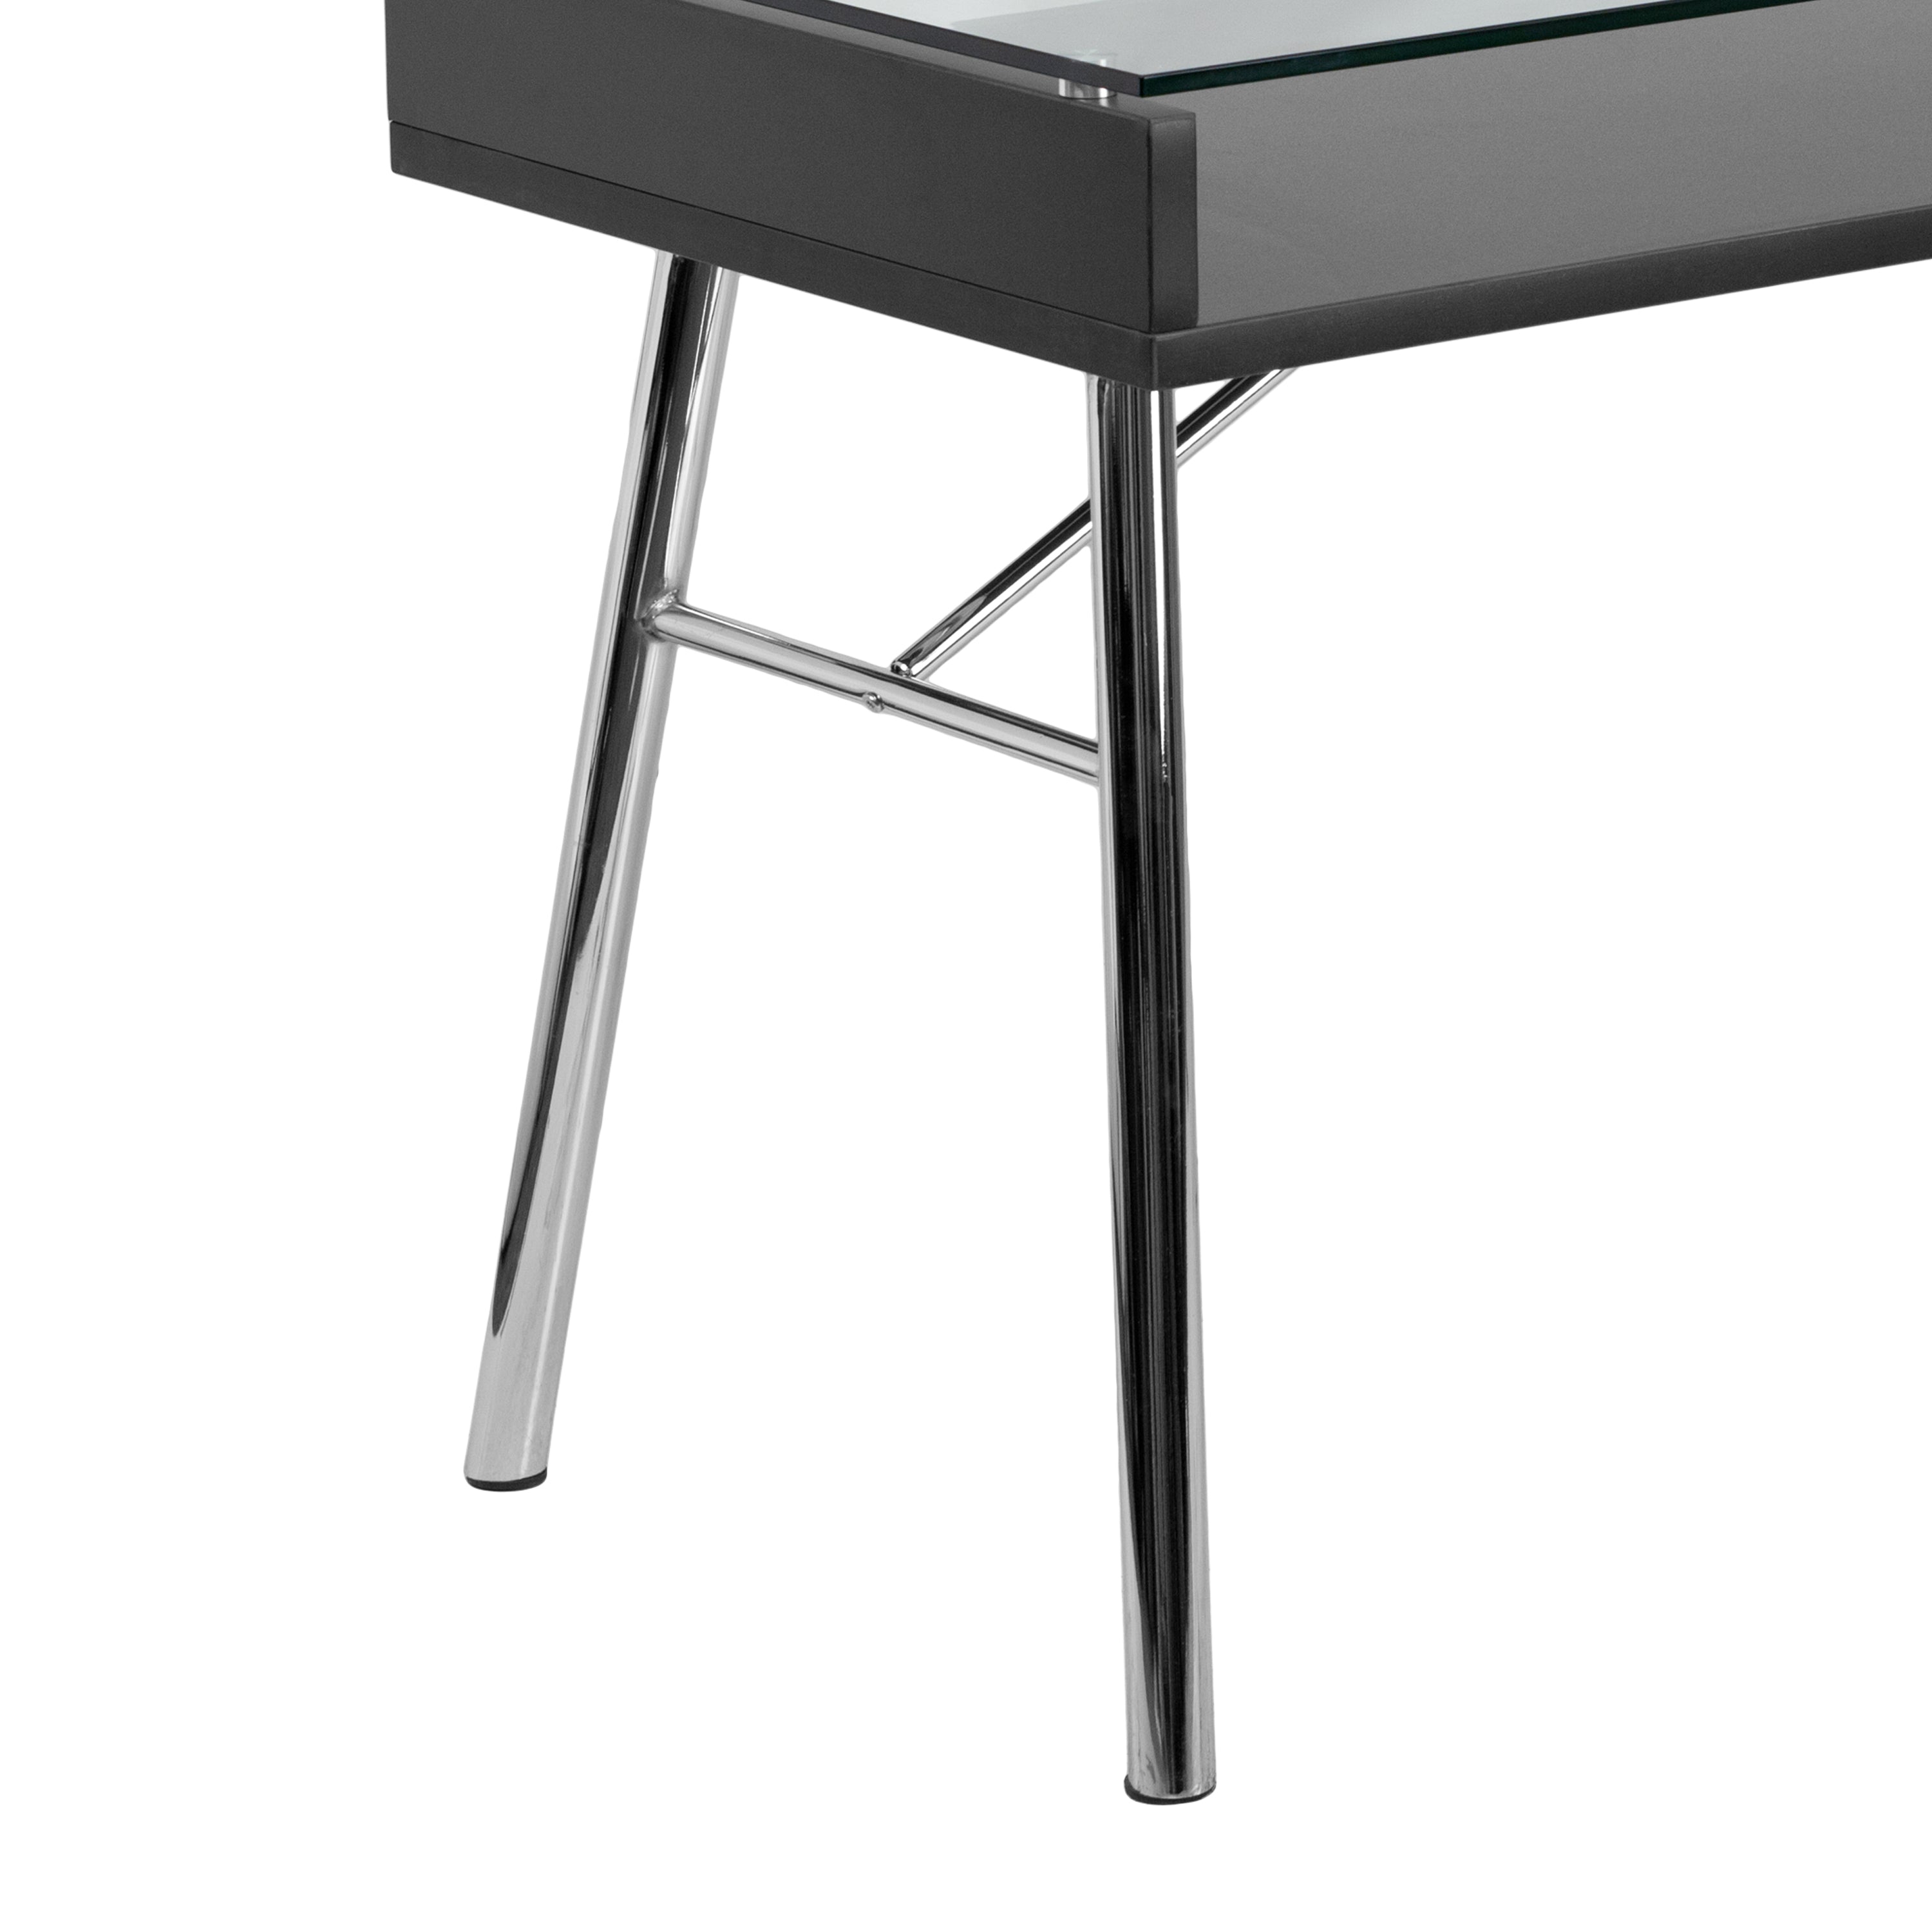 Brettford Desk with Tempered Glass Top-Desk-Flash Furniture-Wall2Wall Furnishings